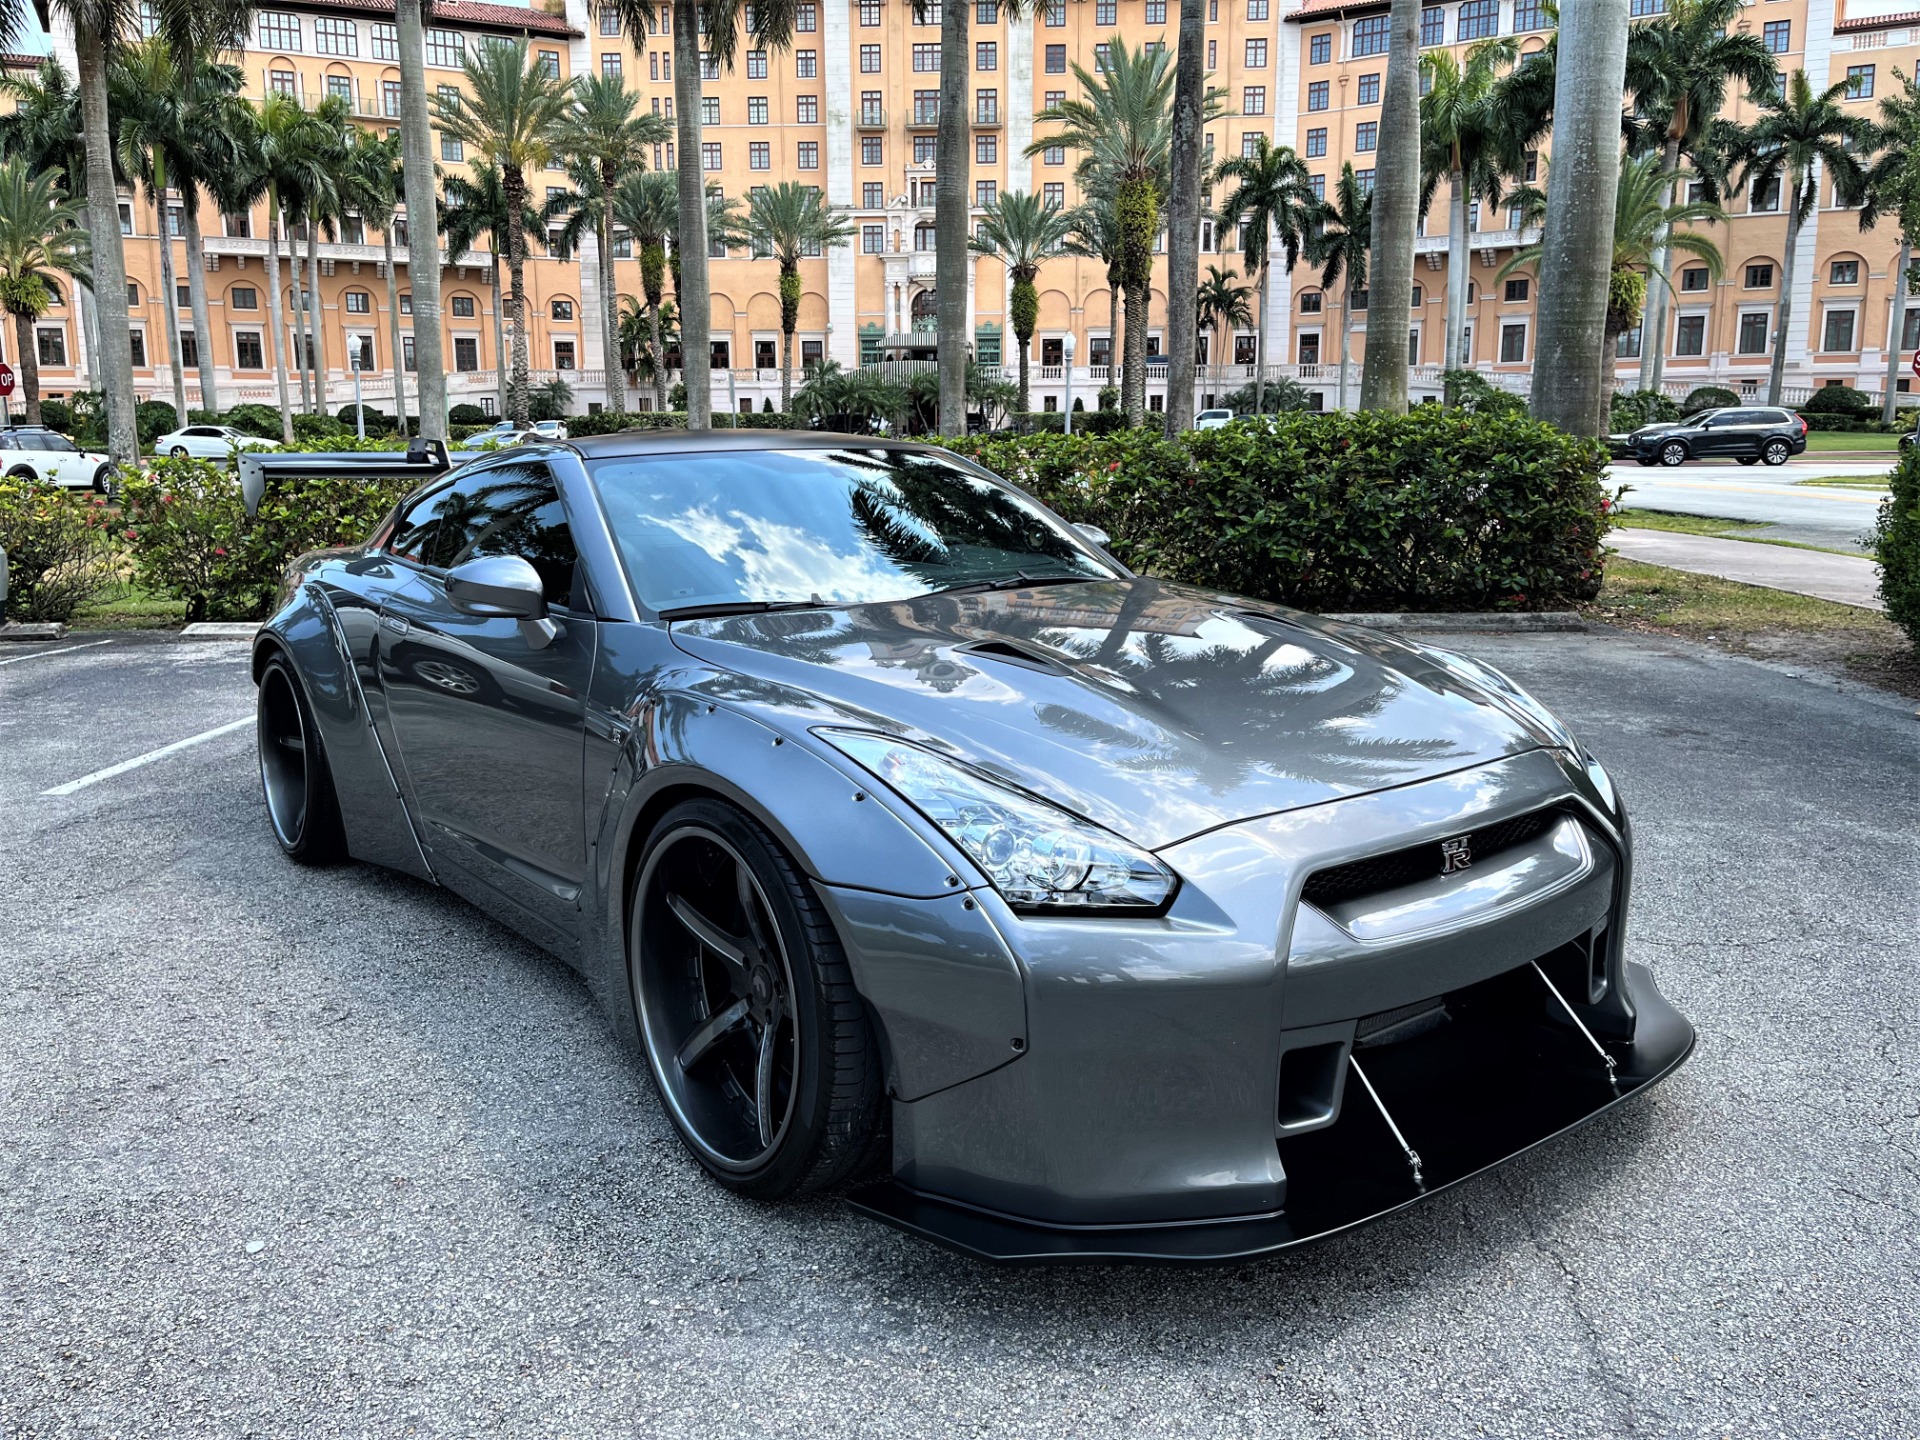 Used 2014 Nissan GT-R Track Edition for sale $149,850 at The Gables Sports Cars in Miami FL 33146 3